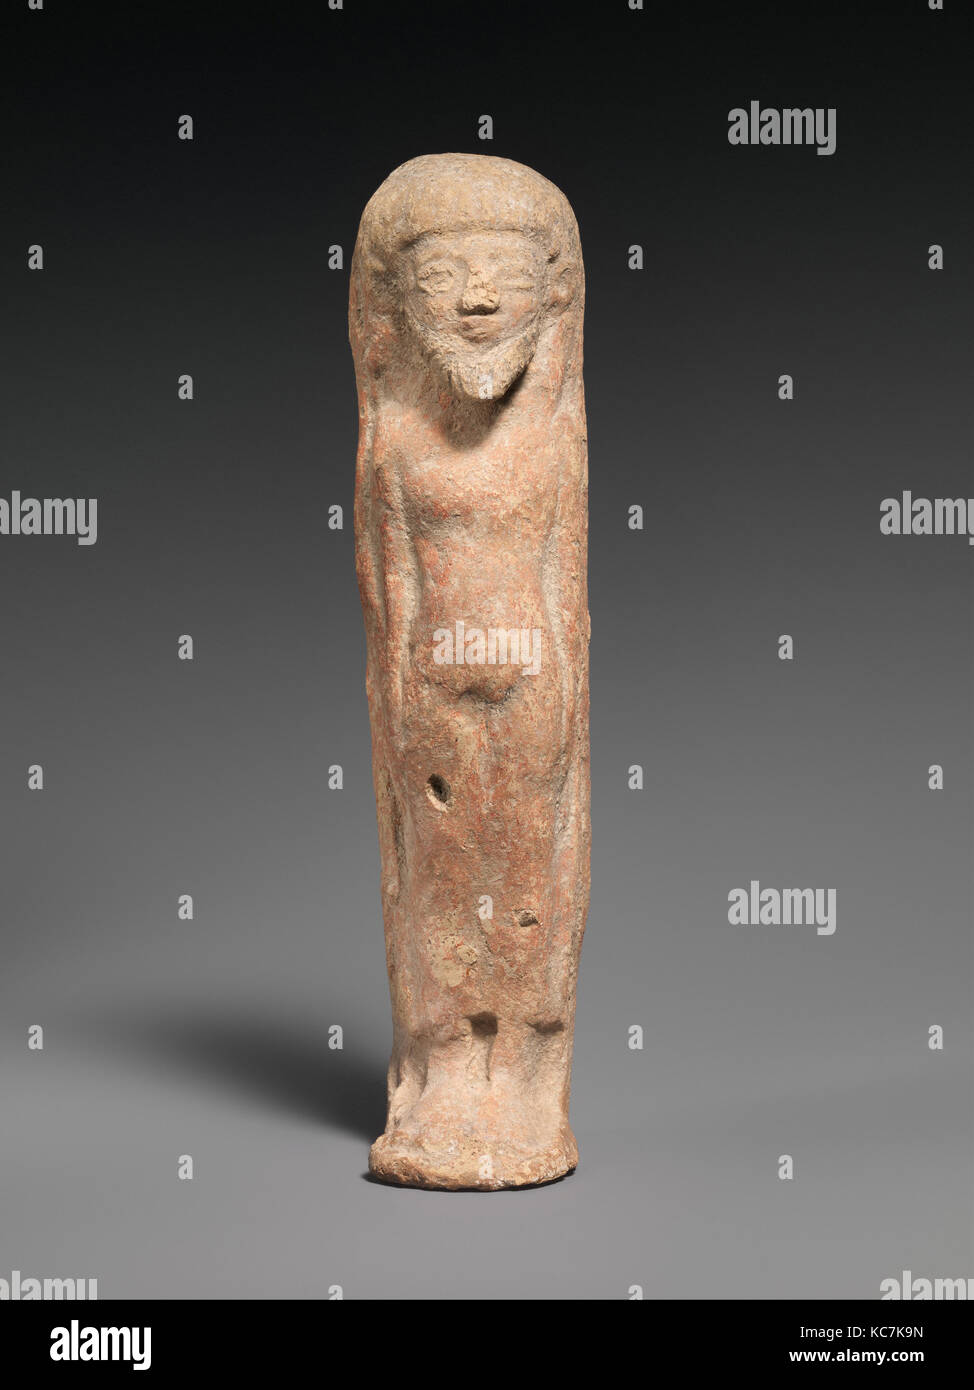 Terracotta figure, Cypro-Archaic II, ca. 600–480 B.C., Cypriot, Terracotta; mold-made, H. 6 in. (15.2 cm), Terracottas, In the Stock Photo